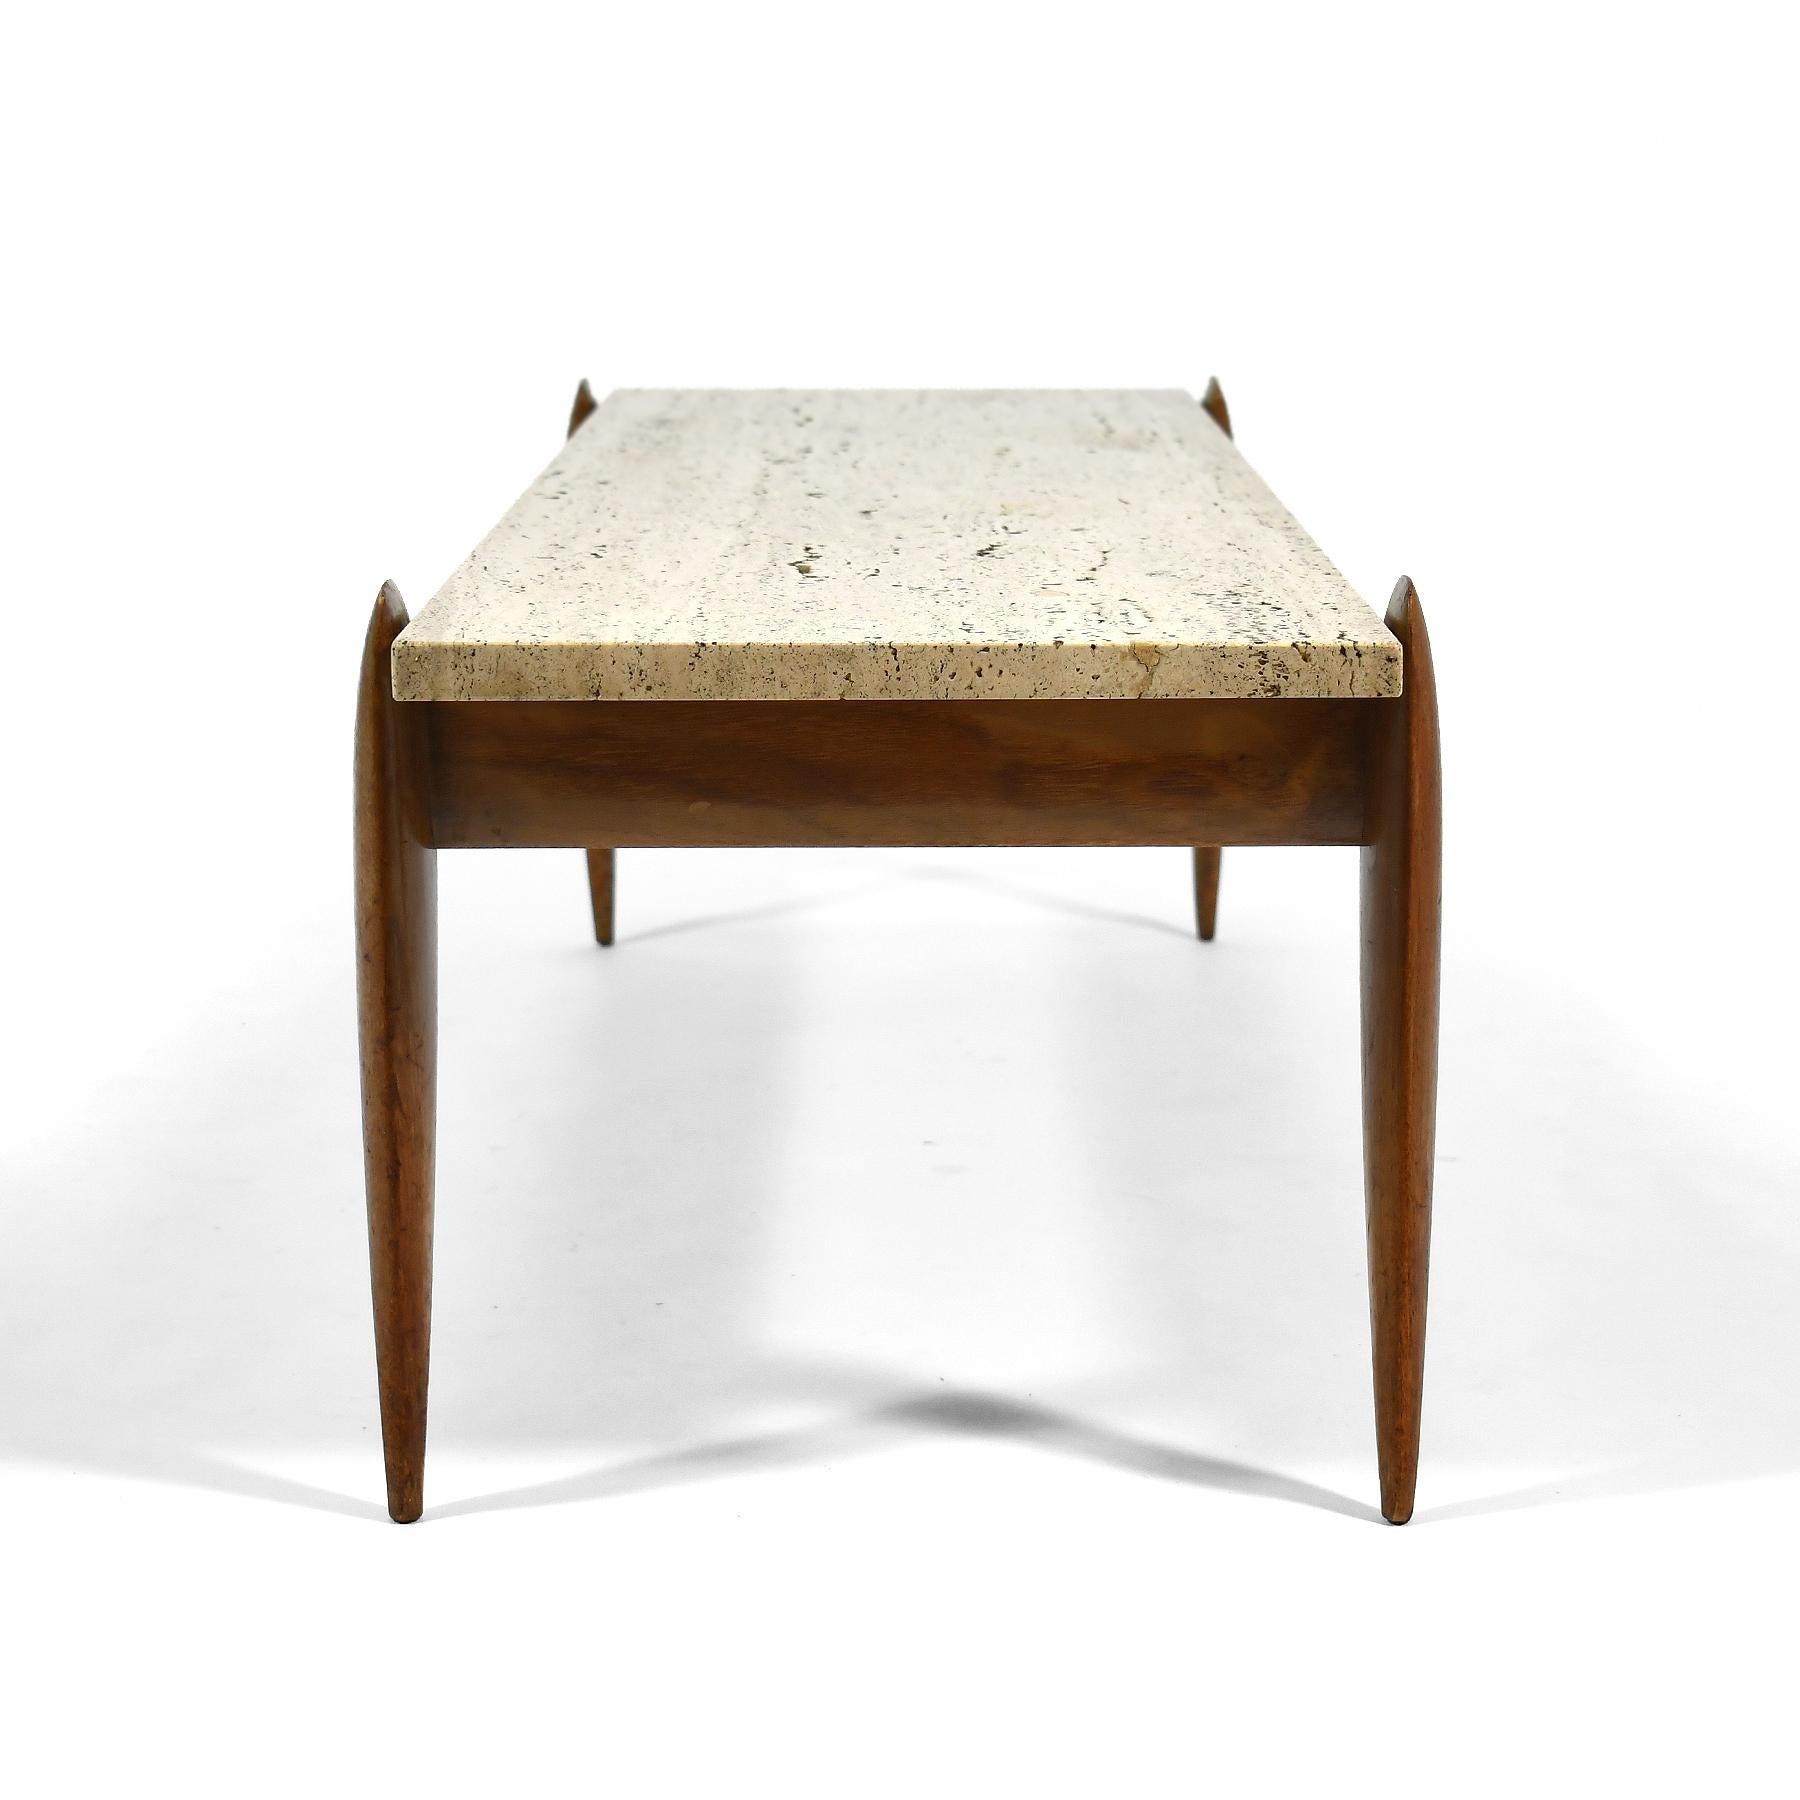 Gio Ponti Travertine Coffee Table In Good Condition For Sale In Highland, IN